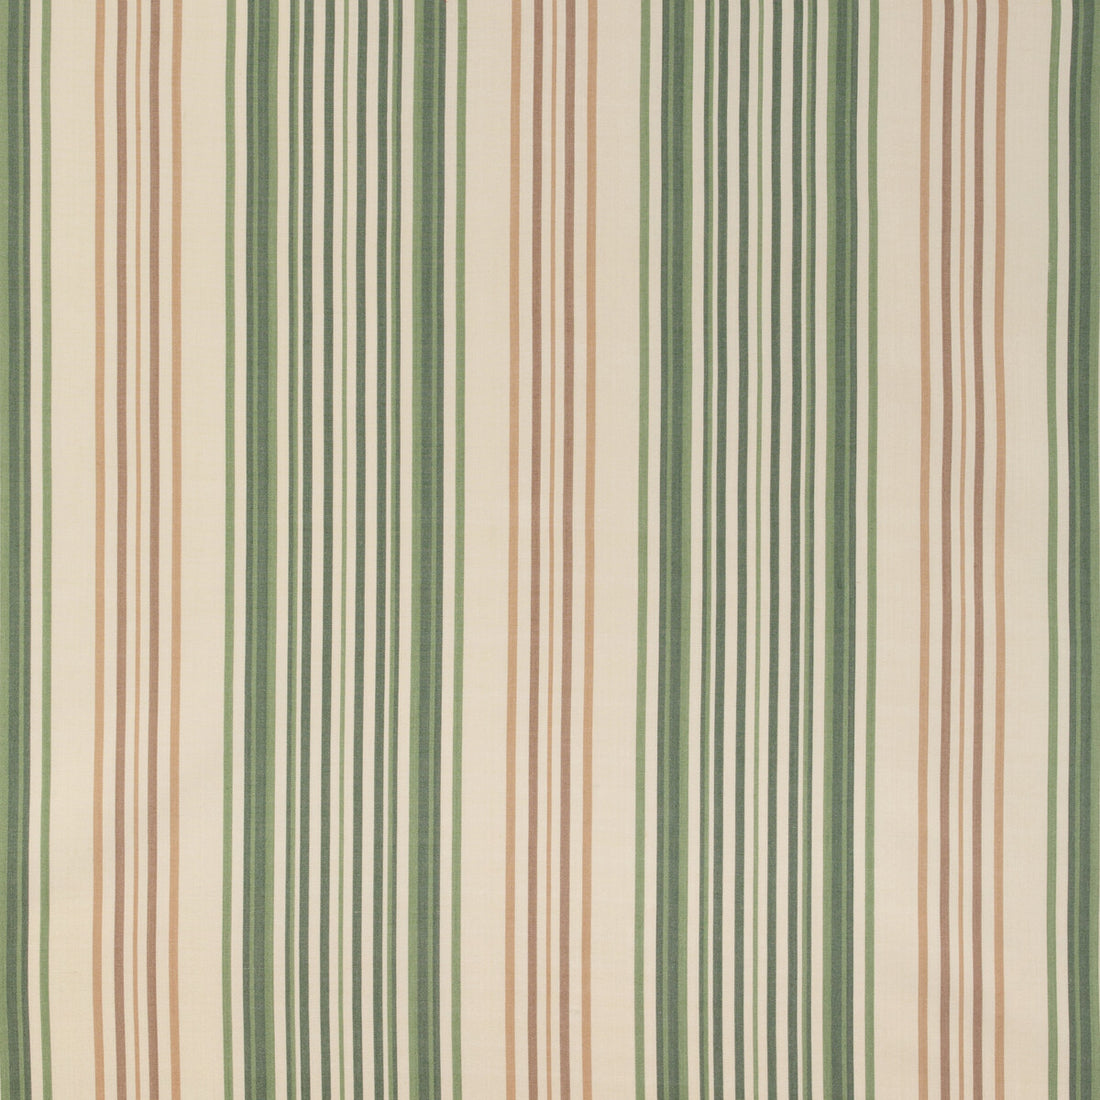 Upland Stripe fabric in fern color - pattern 2023104.316.0 - by Lee Jofa in the Highfield Stripes And Plaids collection